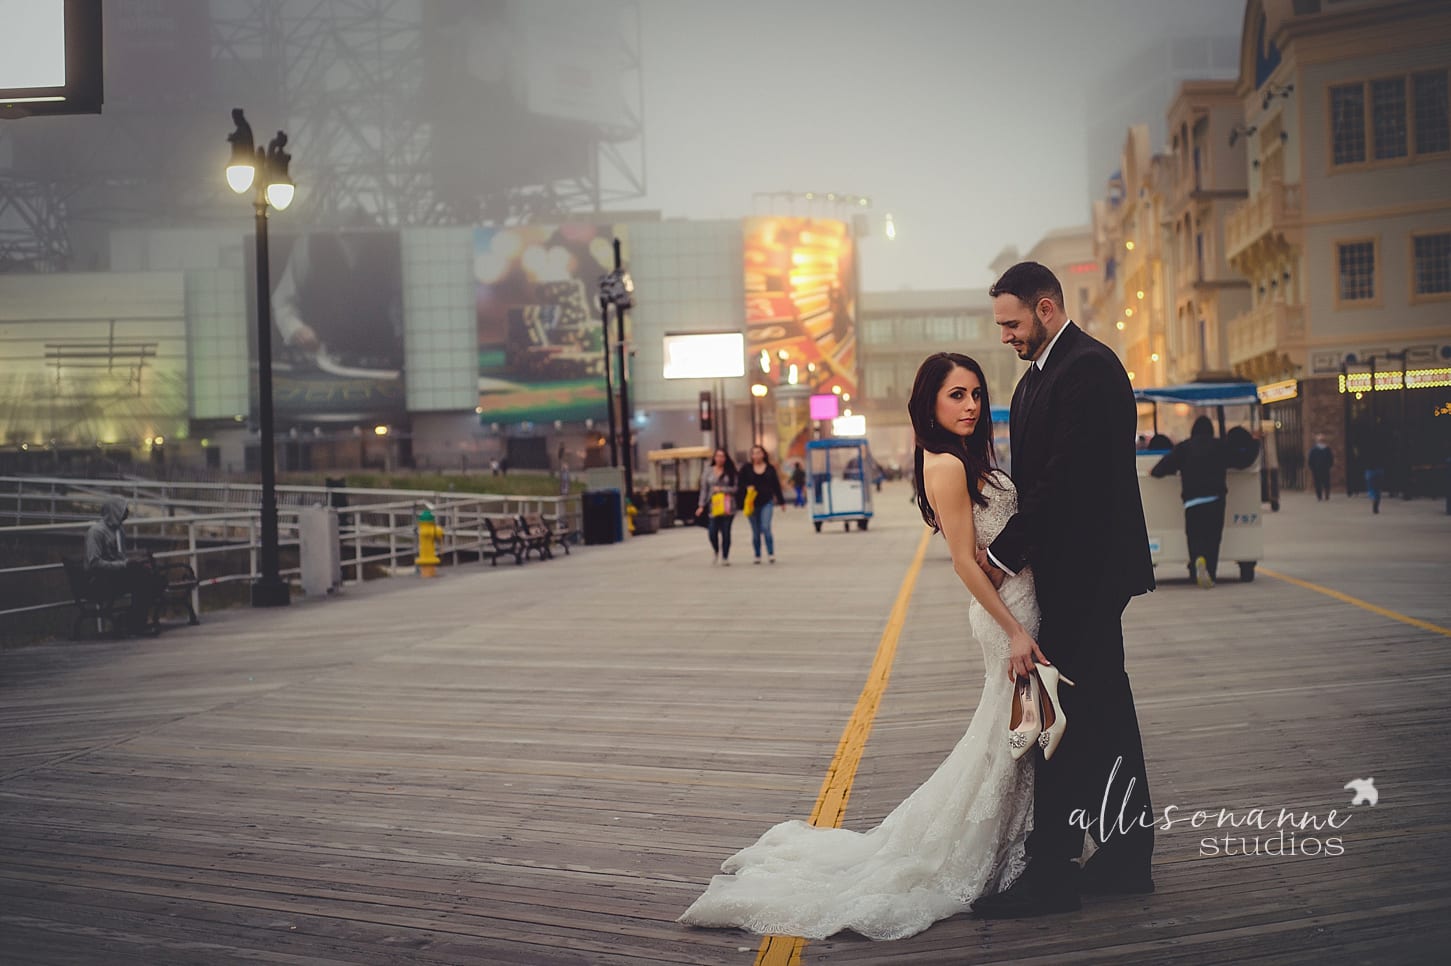 Boardwalk, Say Yes to the Dress, TLC, Macie & Herb, One Atlantic, Atlantic City, happily ever after, sandy toes, misty evening, blueberries, Macrie Brothers, October wedding, Bally's Casino, love, Hammonton, AllisonAnne Studios, Allison Gallagher 